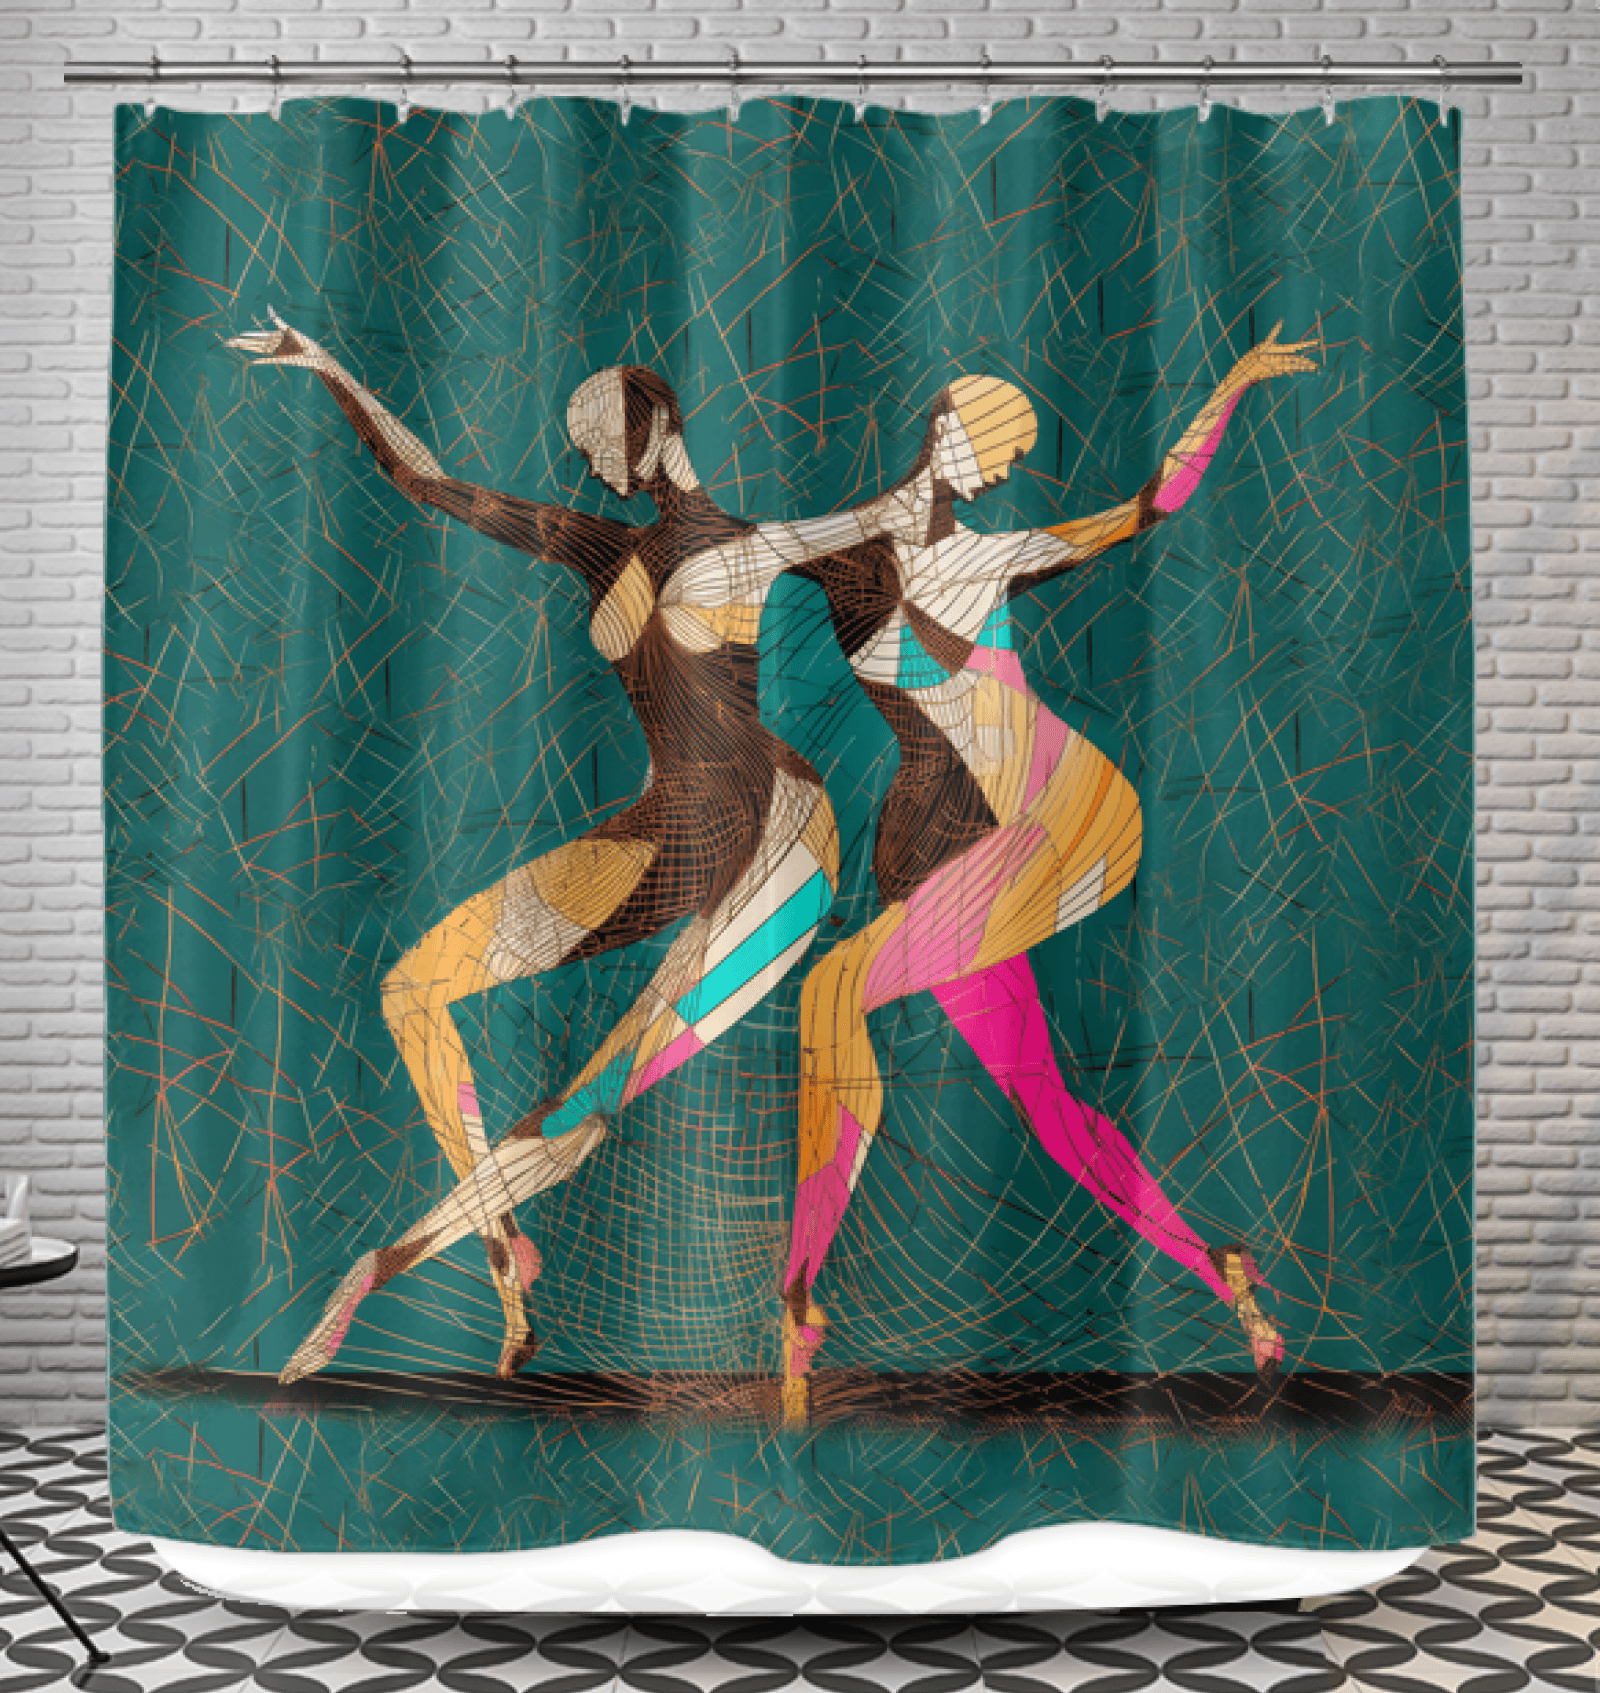 Elegant shower curtain featuring athletic woman in dance pose for bathroom decor